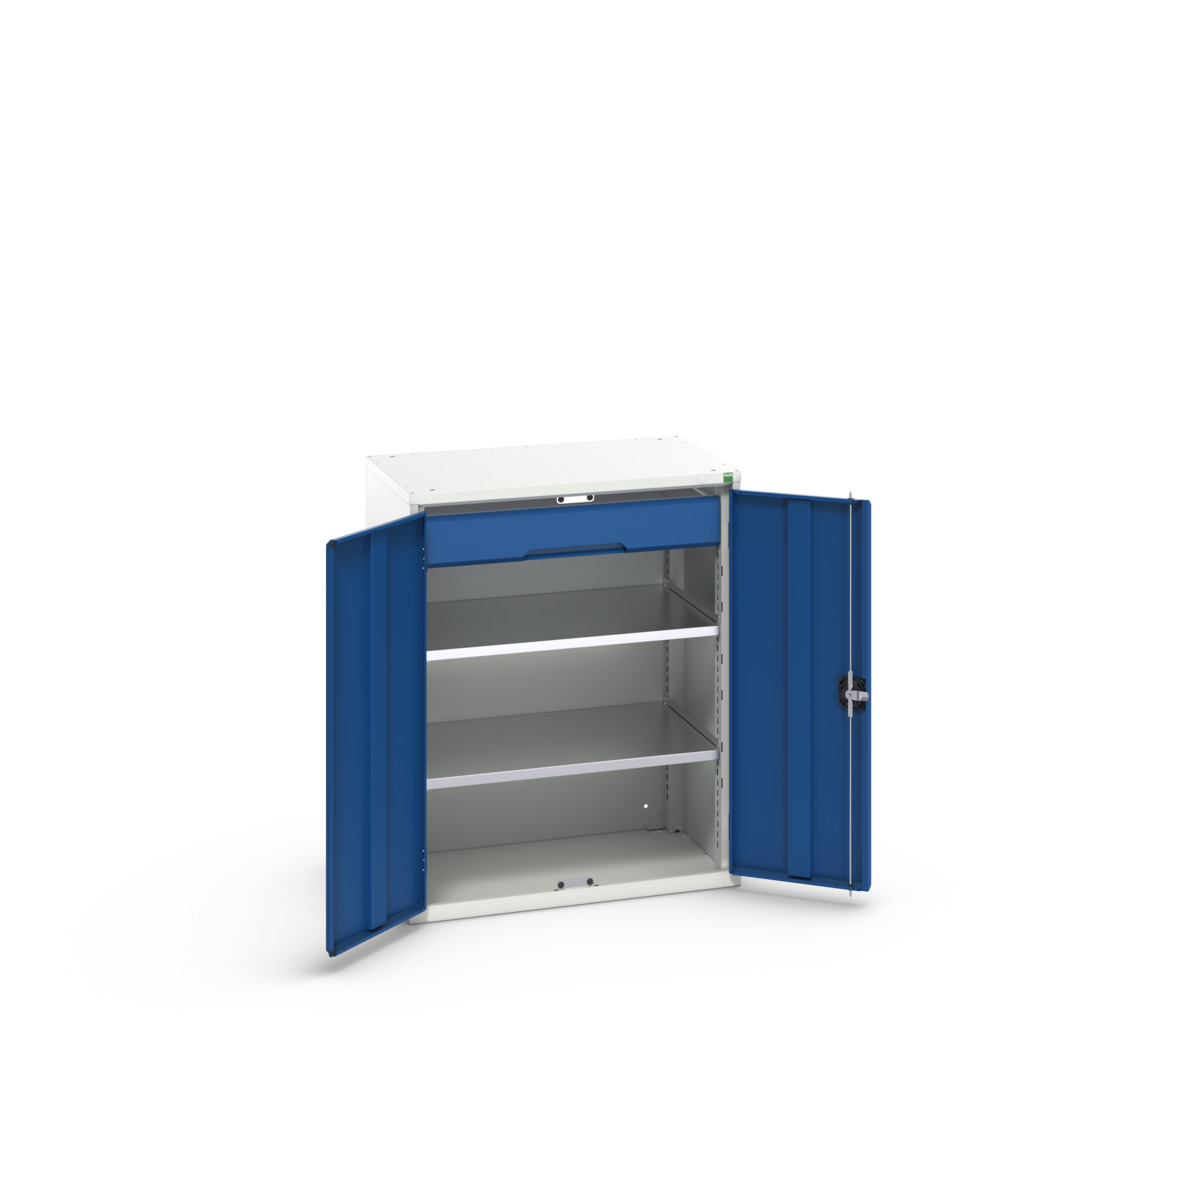 16926452.11 - verso kitted cupboard